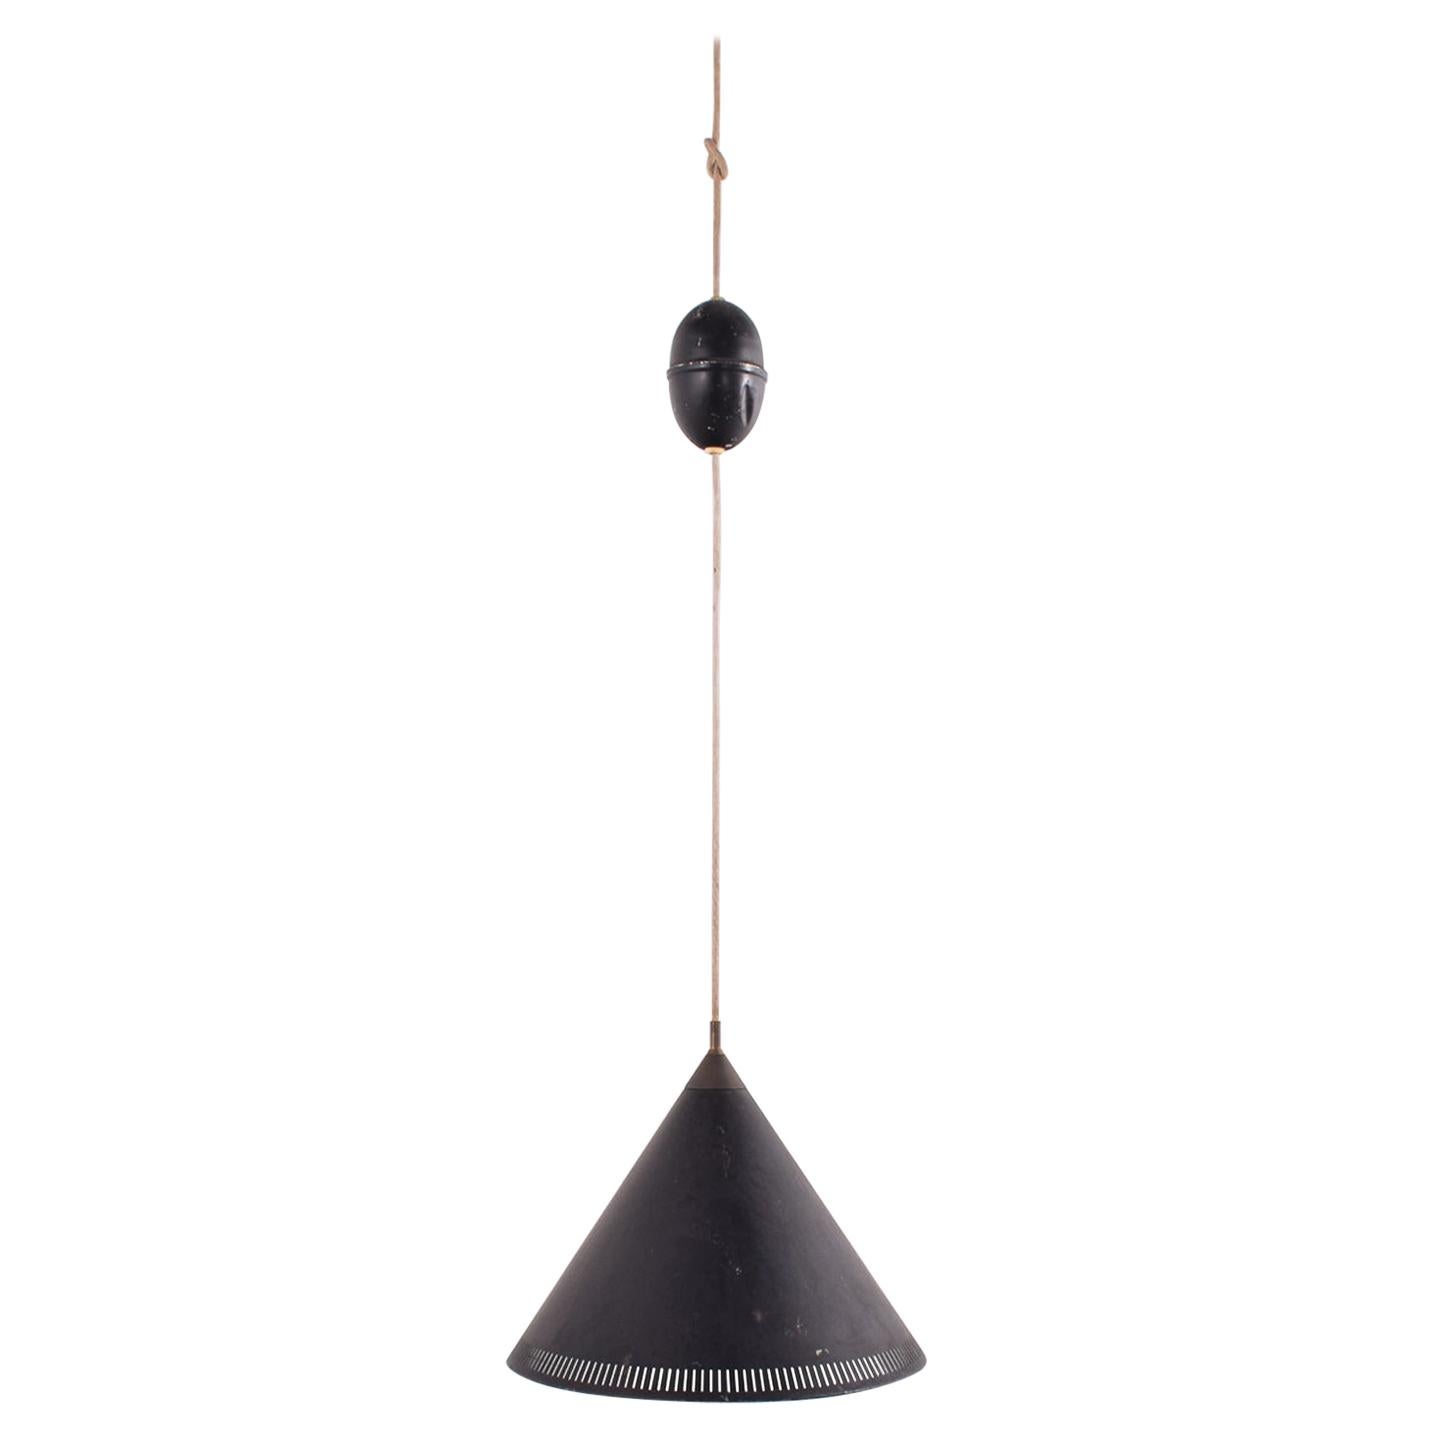 Ceiling Lamp by Bent Karlby for Lyfa, Black Cone, 1960s For Sale